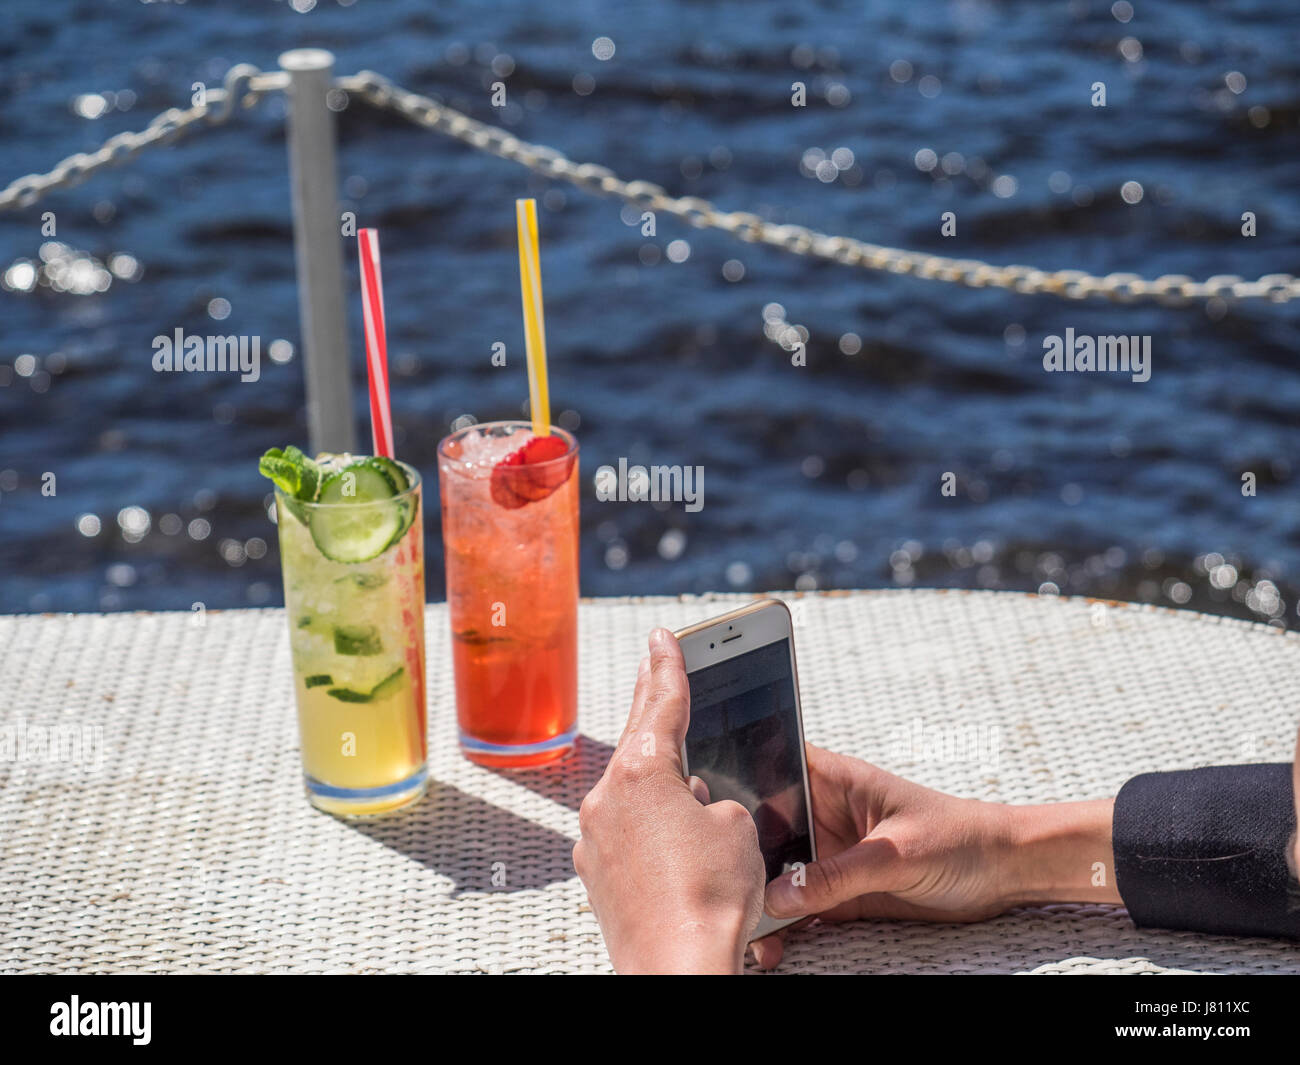 Food blogger photographs with a smartphone two glasses of lemonade on a table on a deck of water background Stock Photo